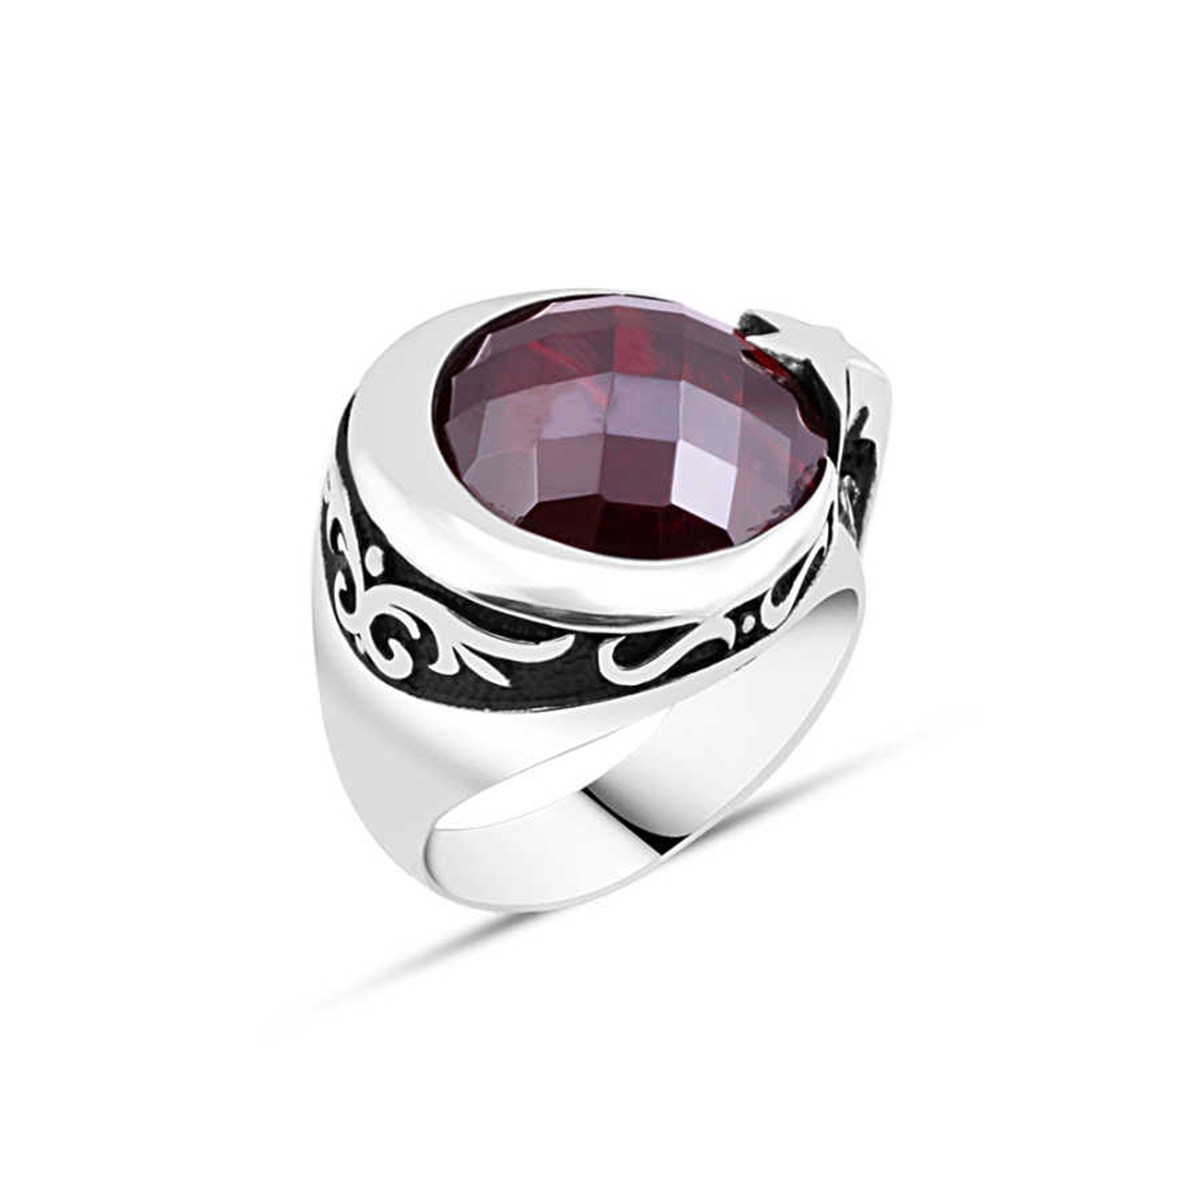 Red Zircon Stone Crescent-Star Sterling Silver Men's Ring